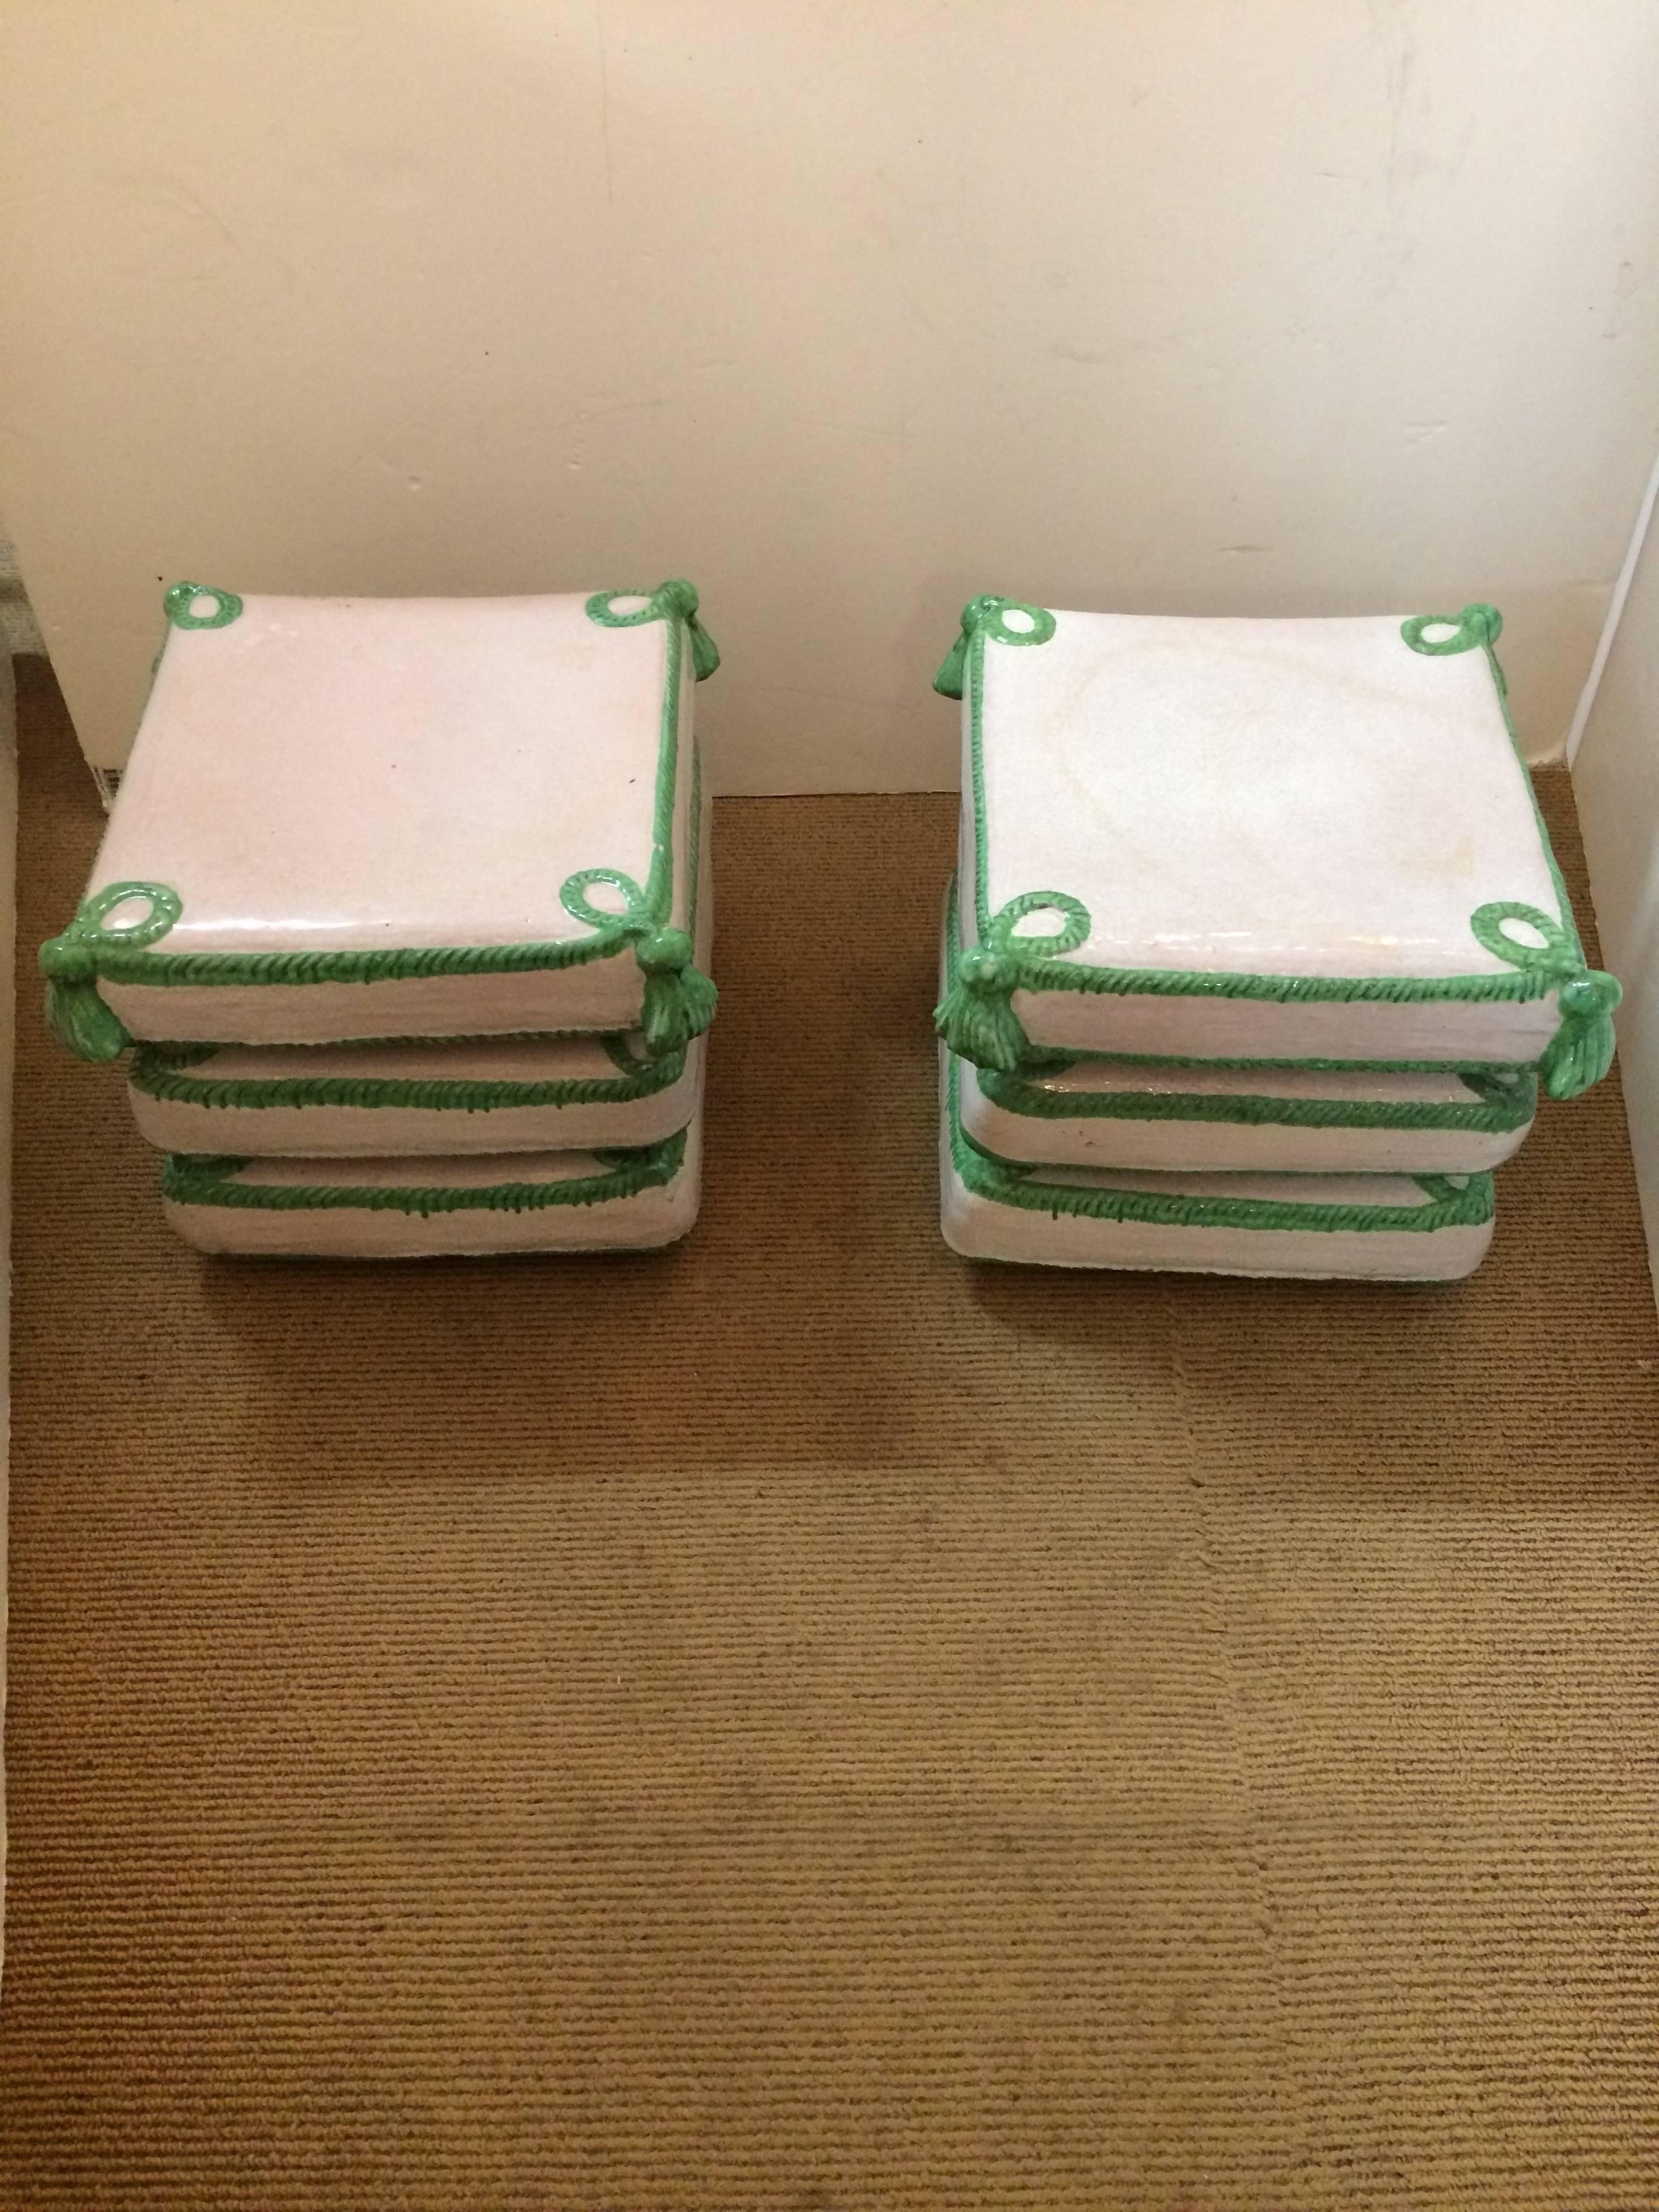 Two super stylish square terracotta garden seats in off-white and green having a twisted rope and tassel decoration. Very versatile measurements to make them function as drinks tables, or paired to make a low coffee table, or as ottomans. Great